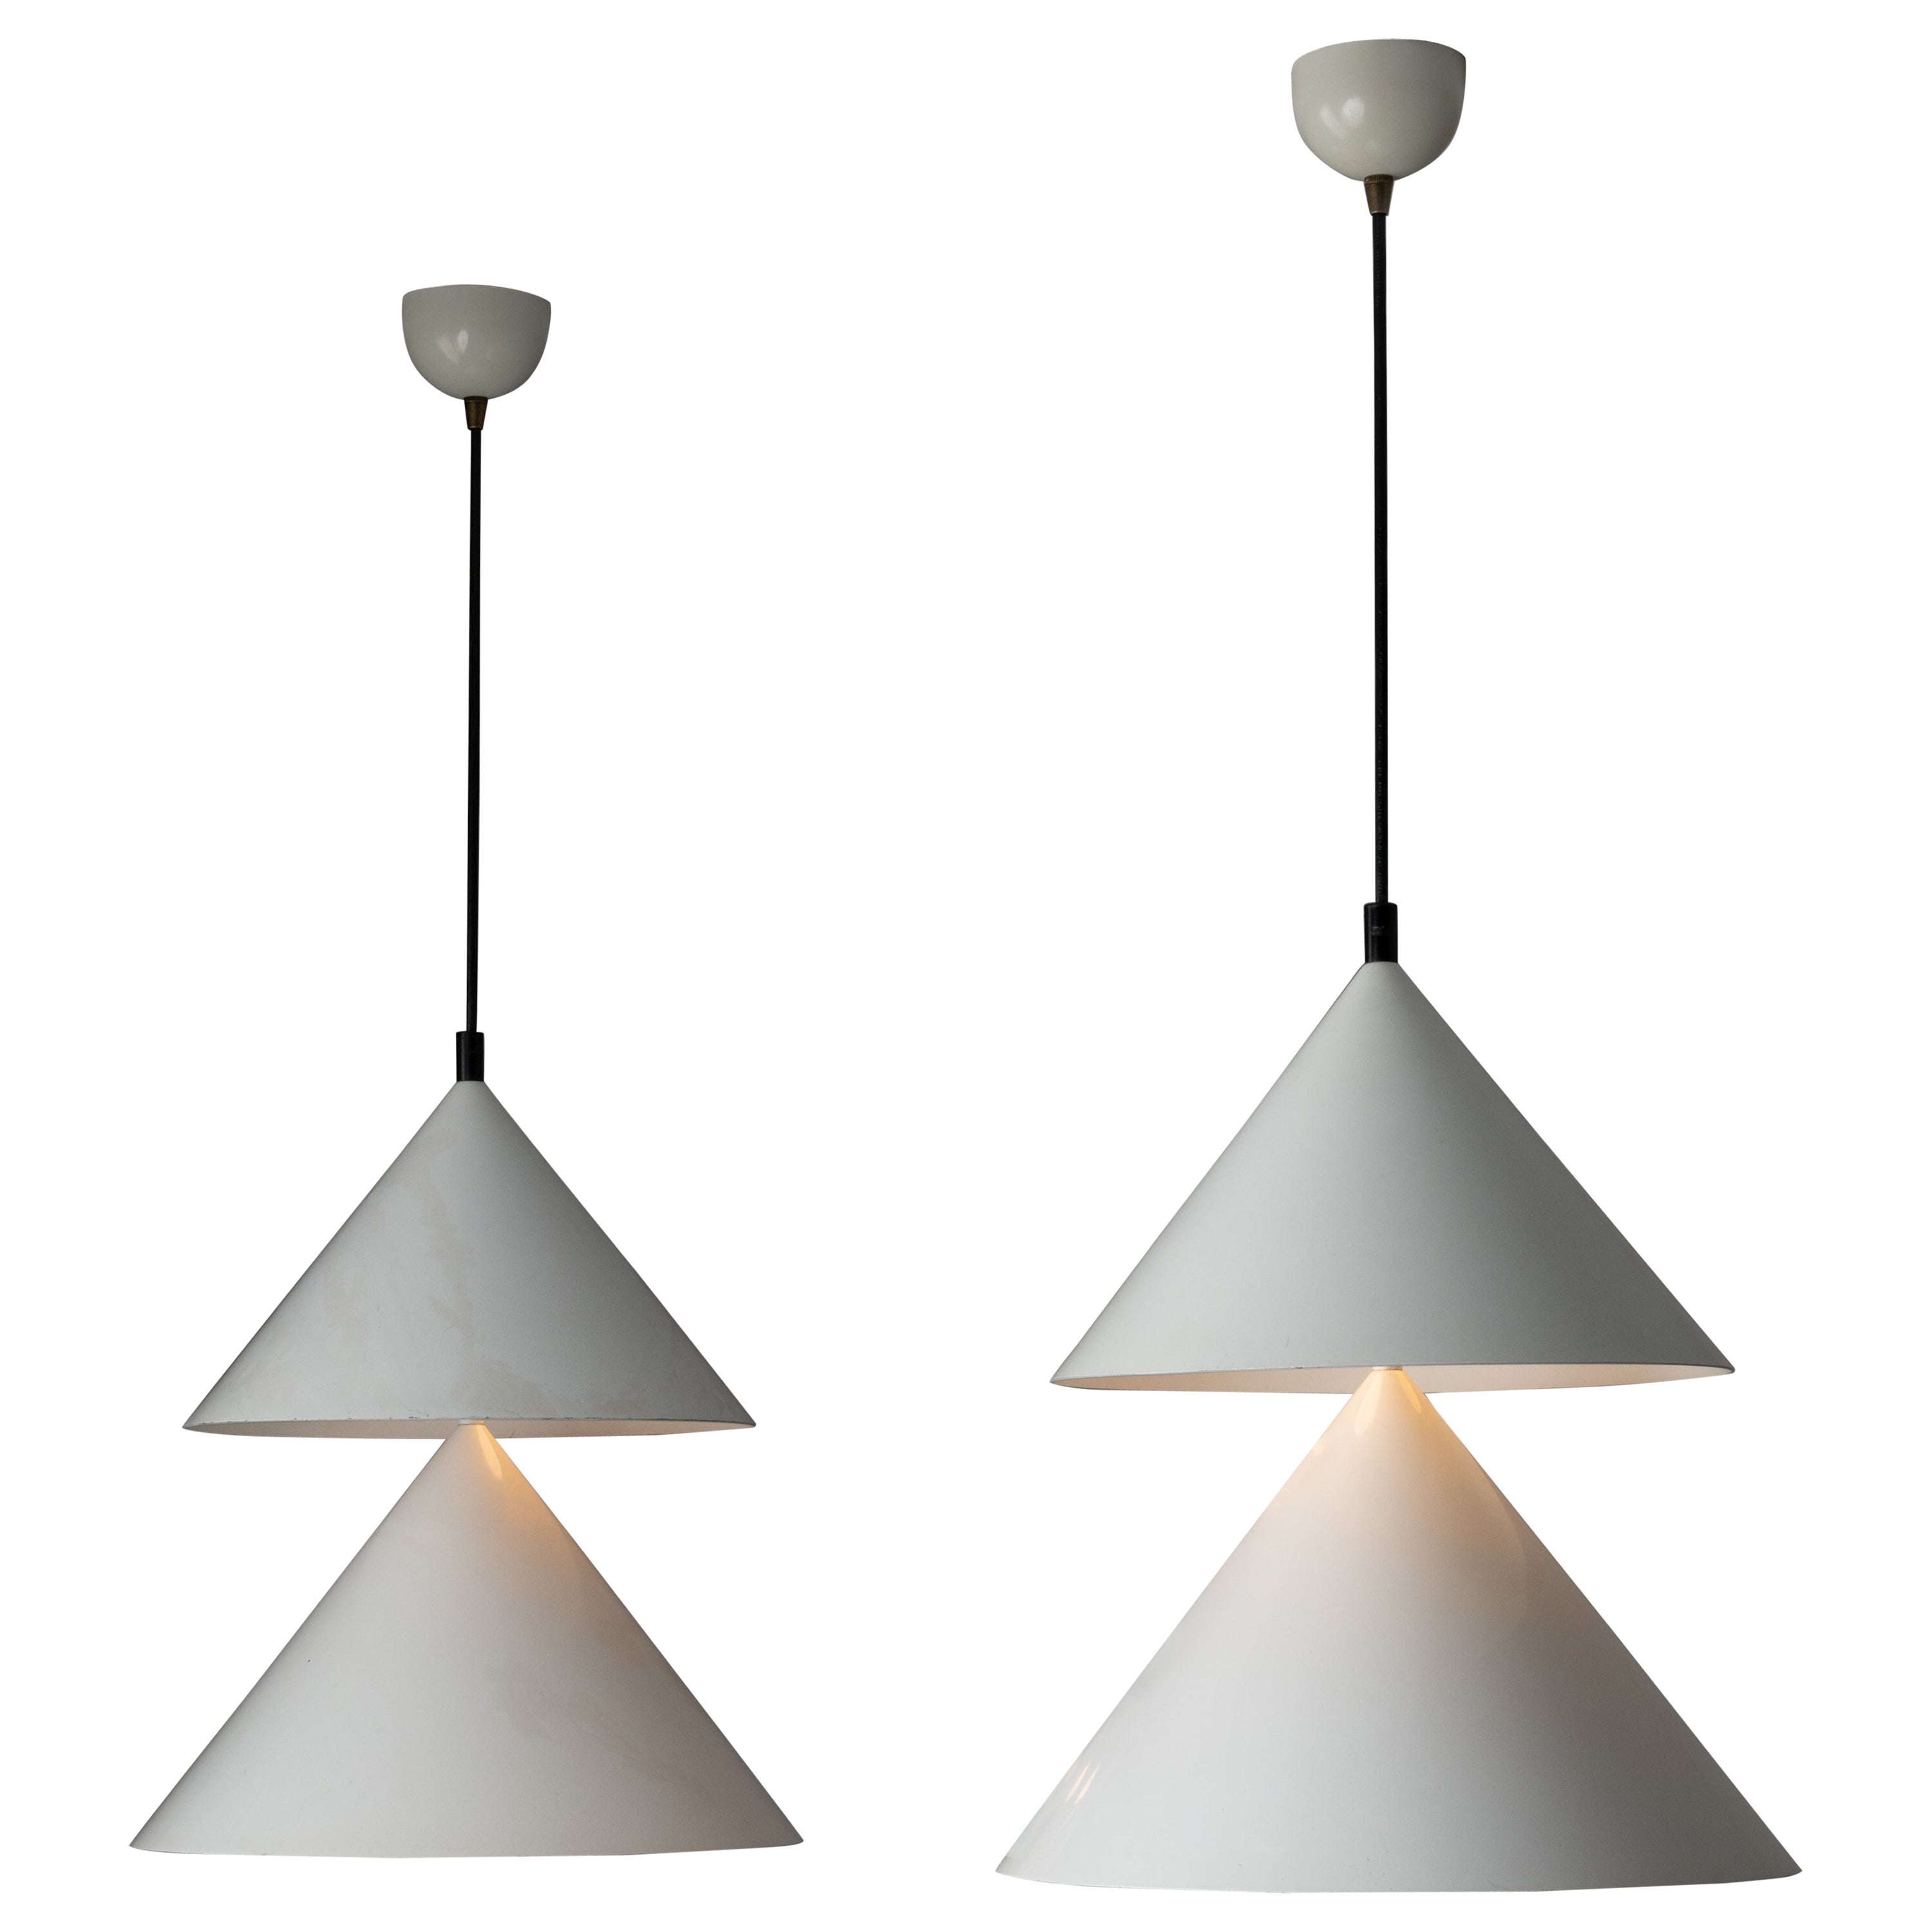 Model 430 'Pascal' Pendant by Vico Magistretti for Oluce